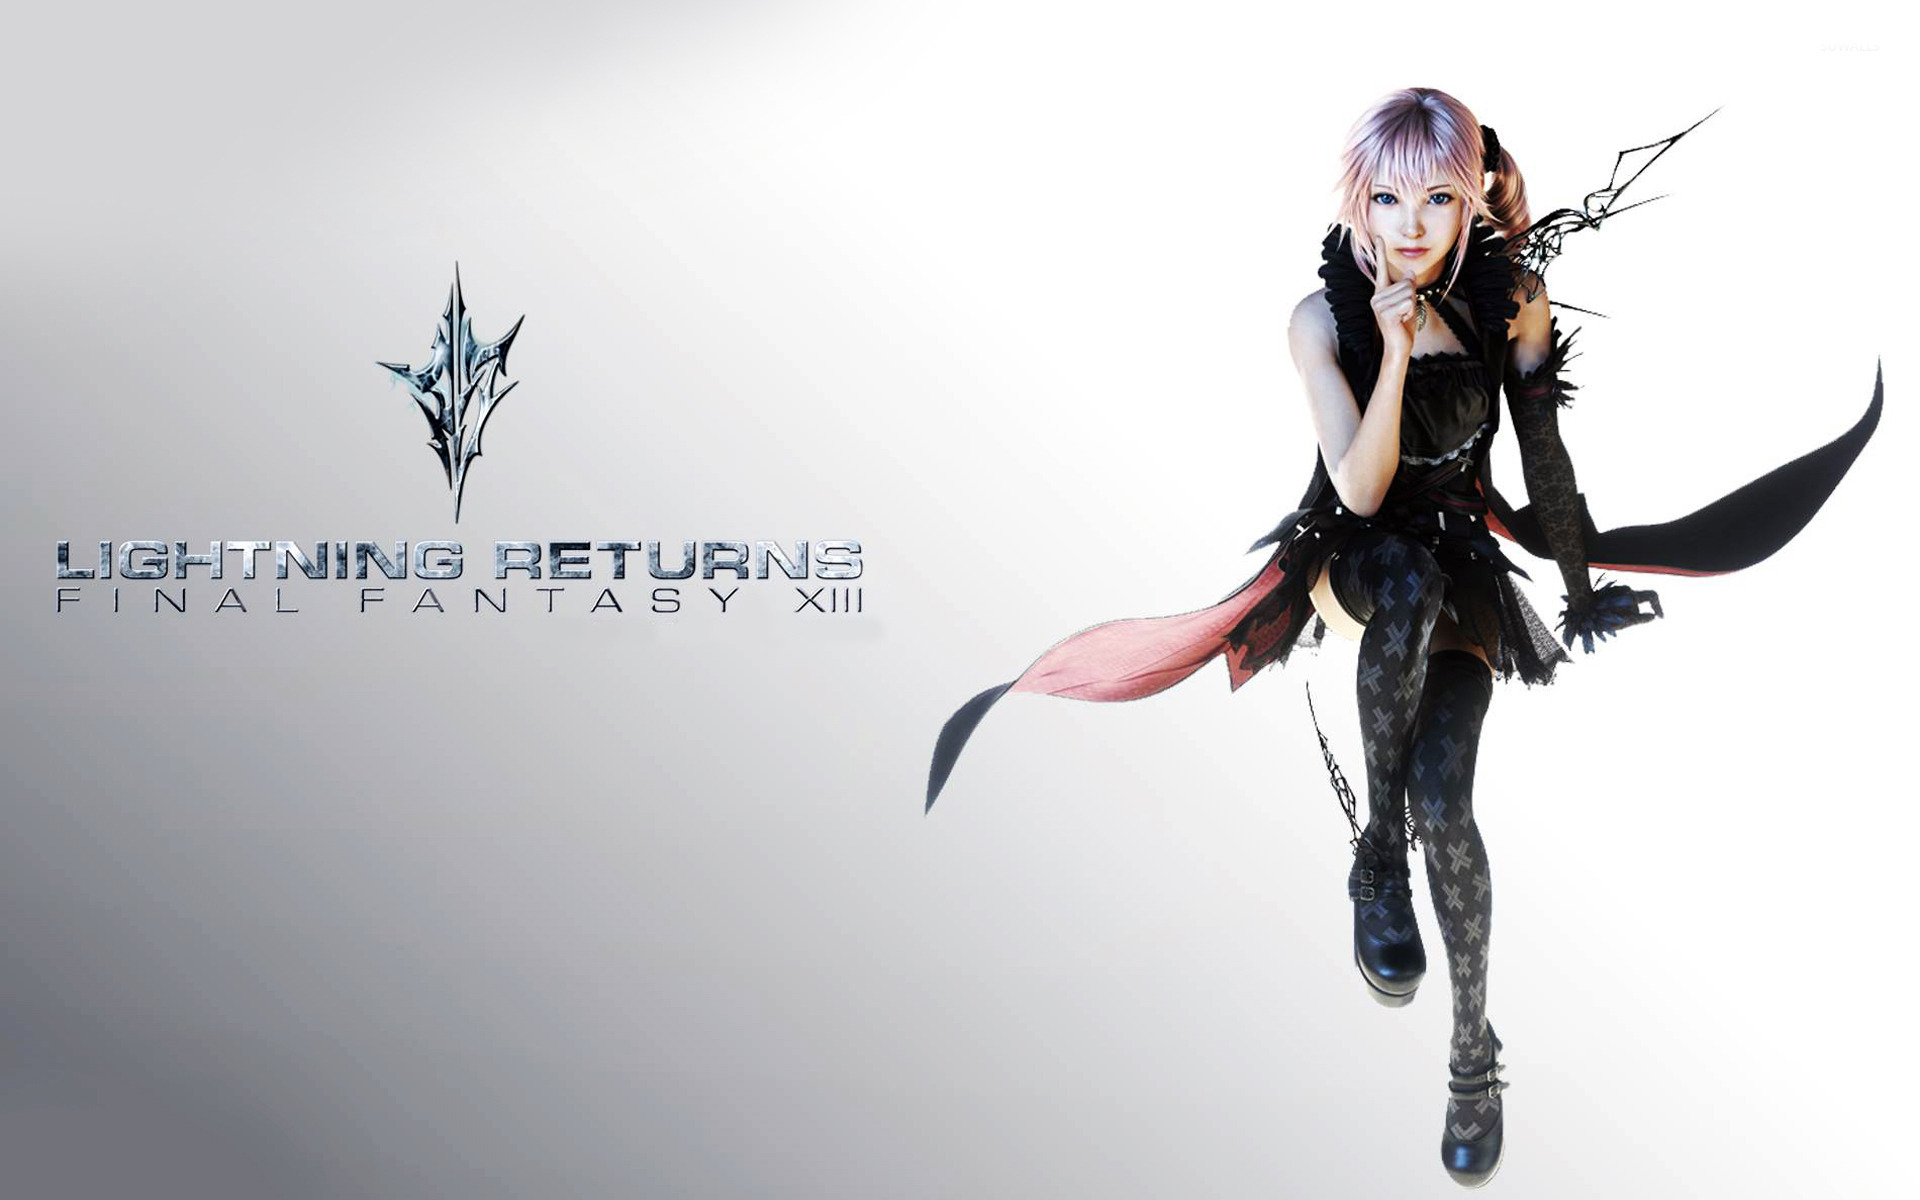 Ff13 Wallpapers